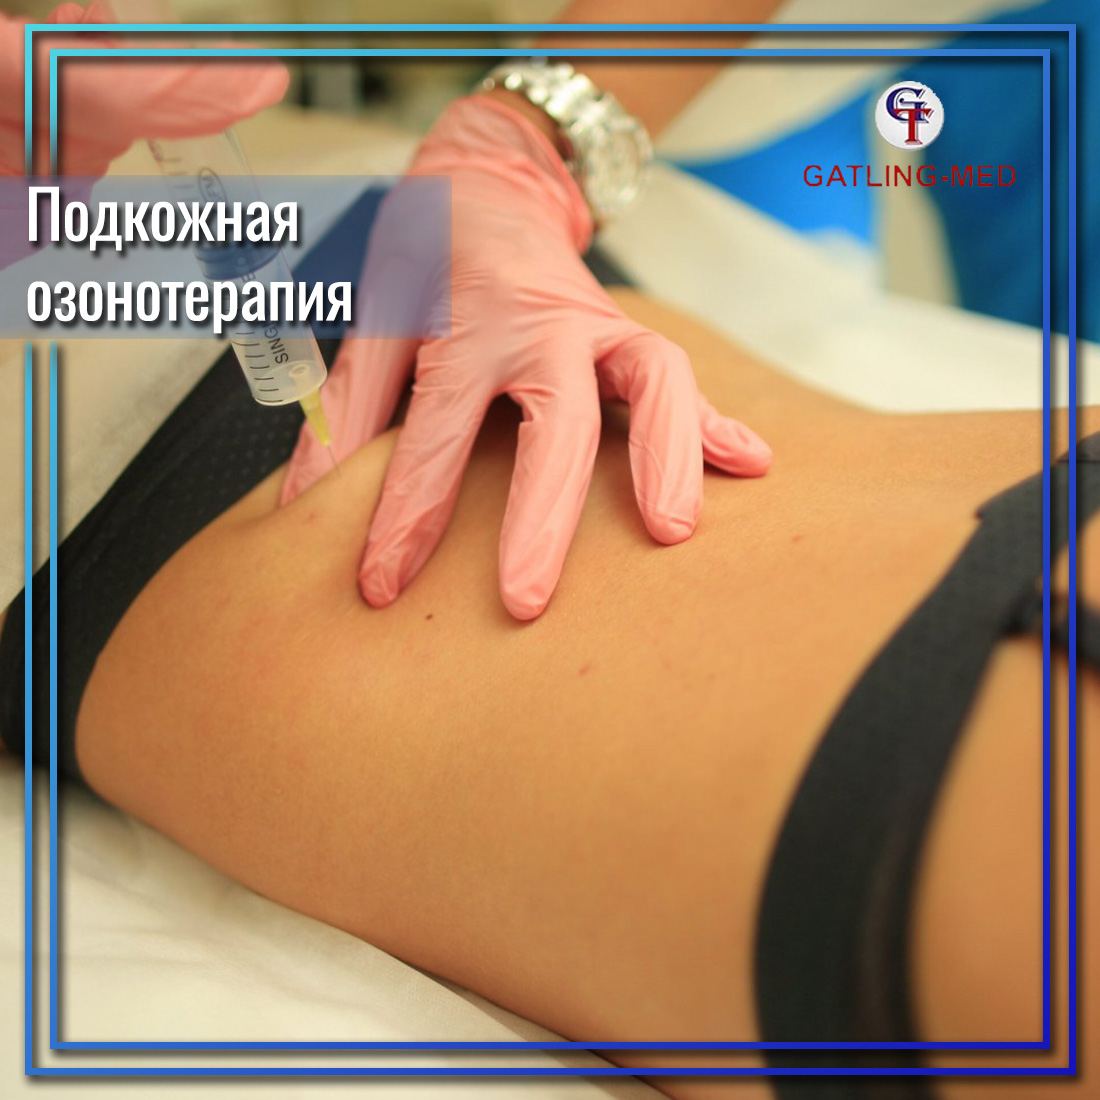 Subcutaneous ozone therapy